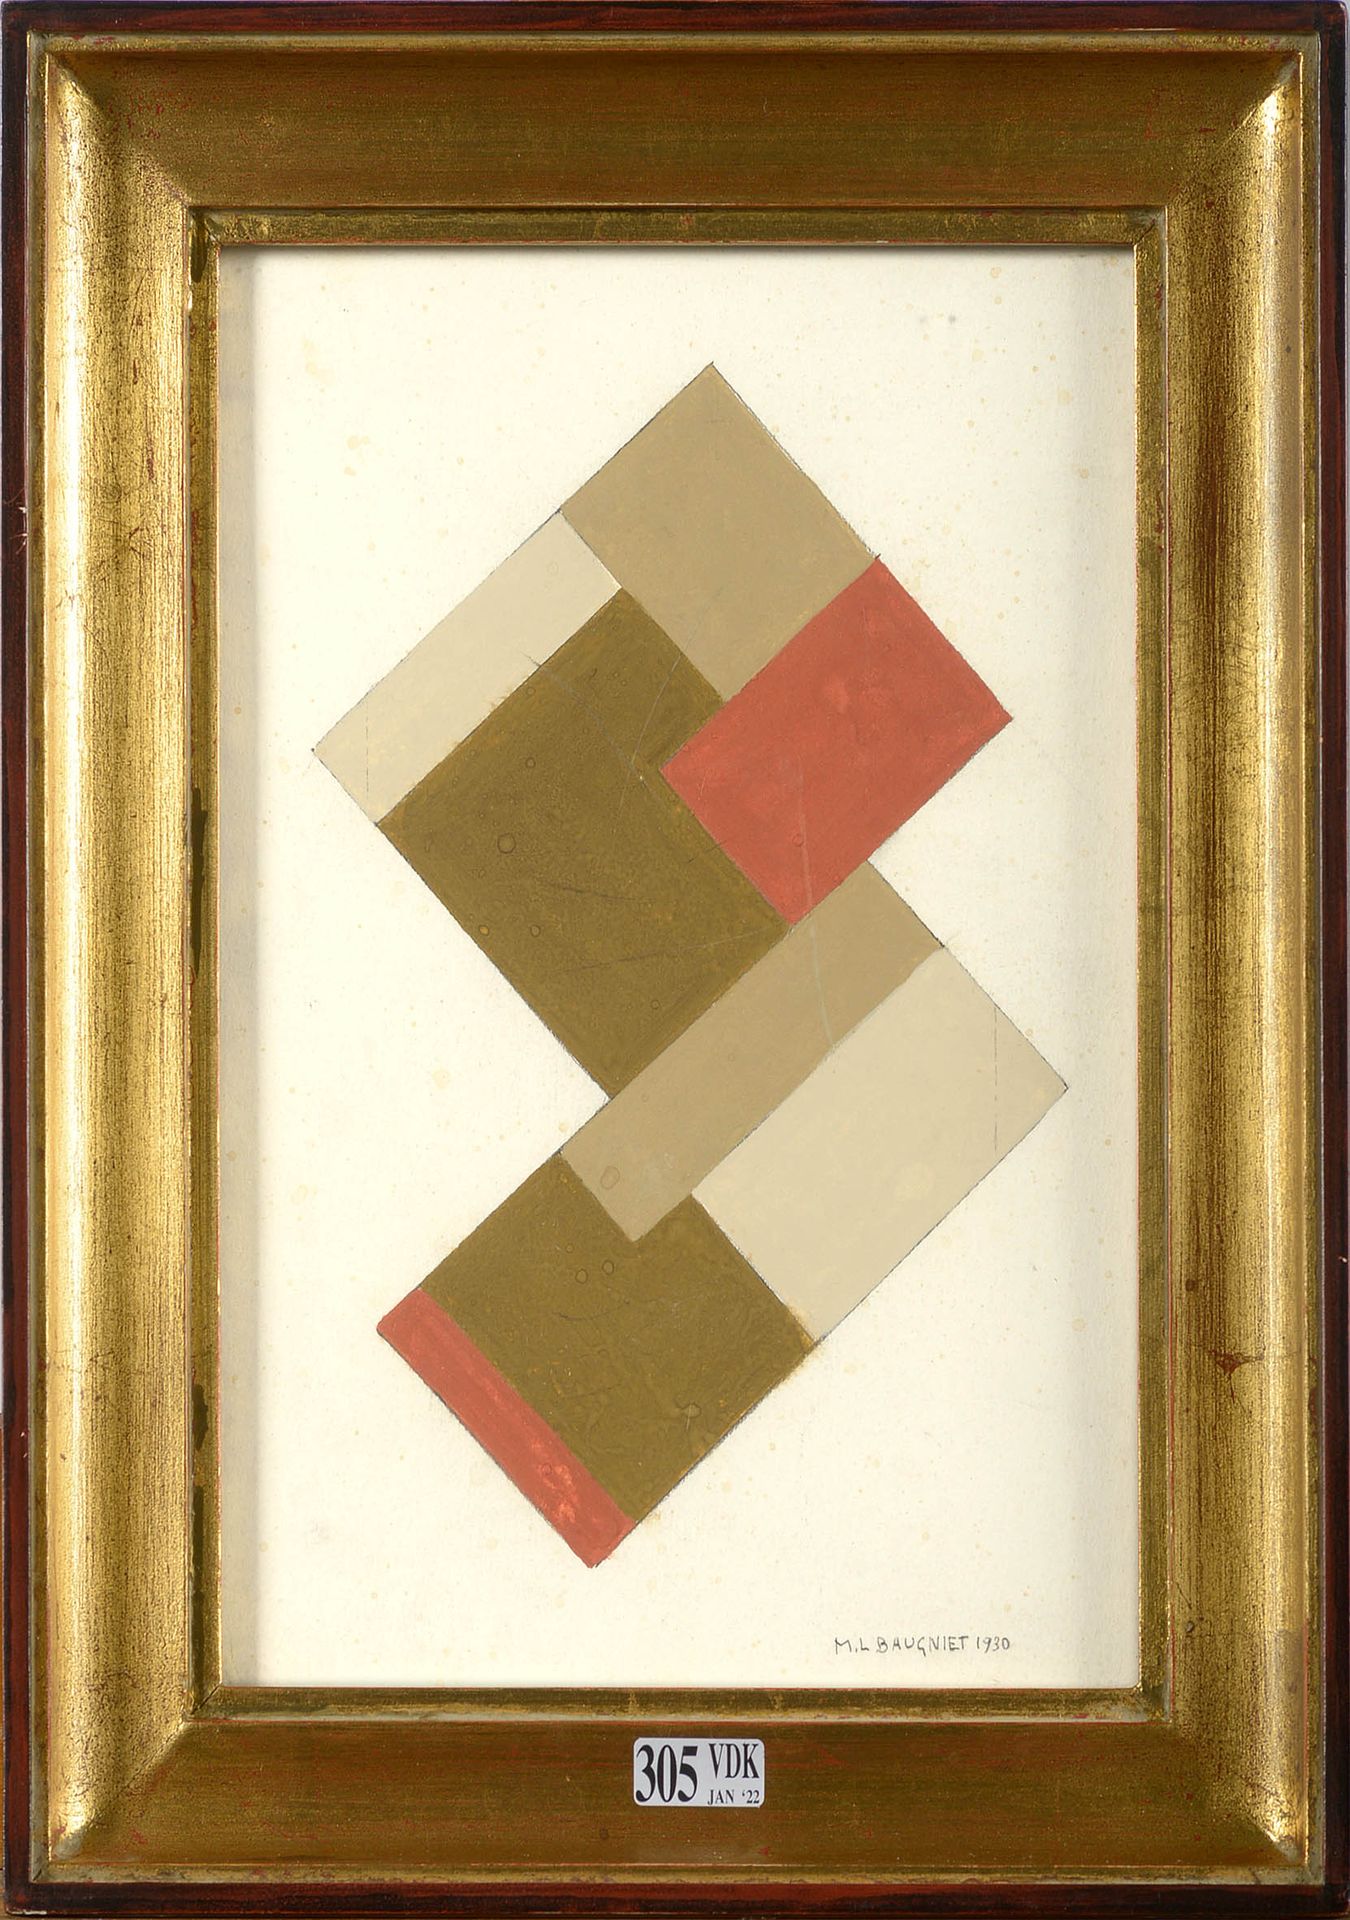 BAUGNIET Marcel Louis (1896 - 1995) "Abstraction" graphite and gouache on paper.&hellip;